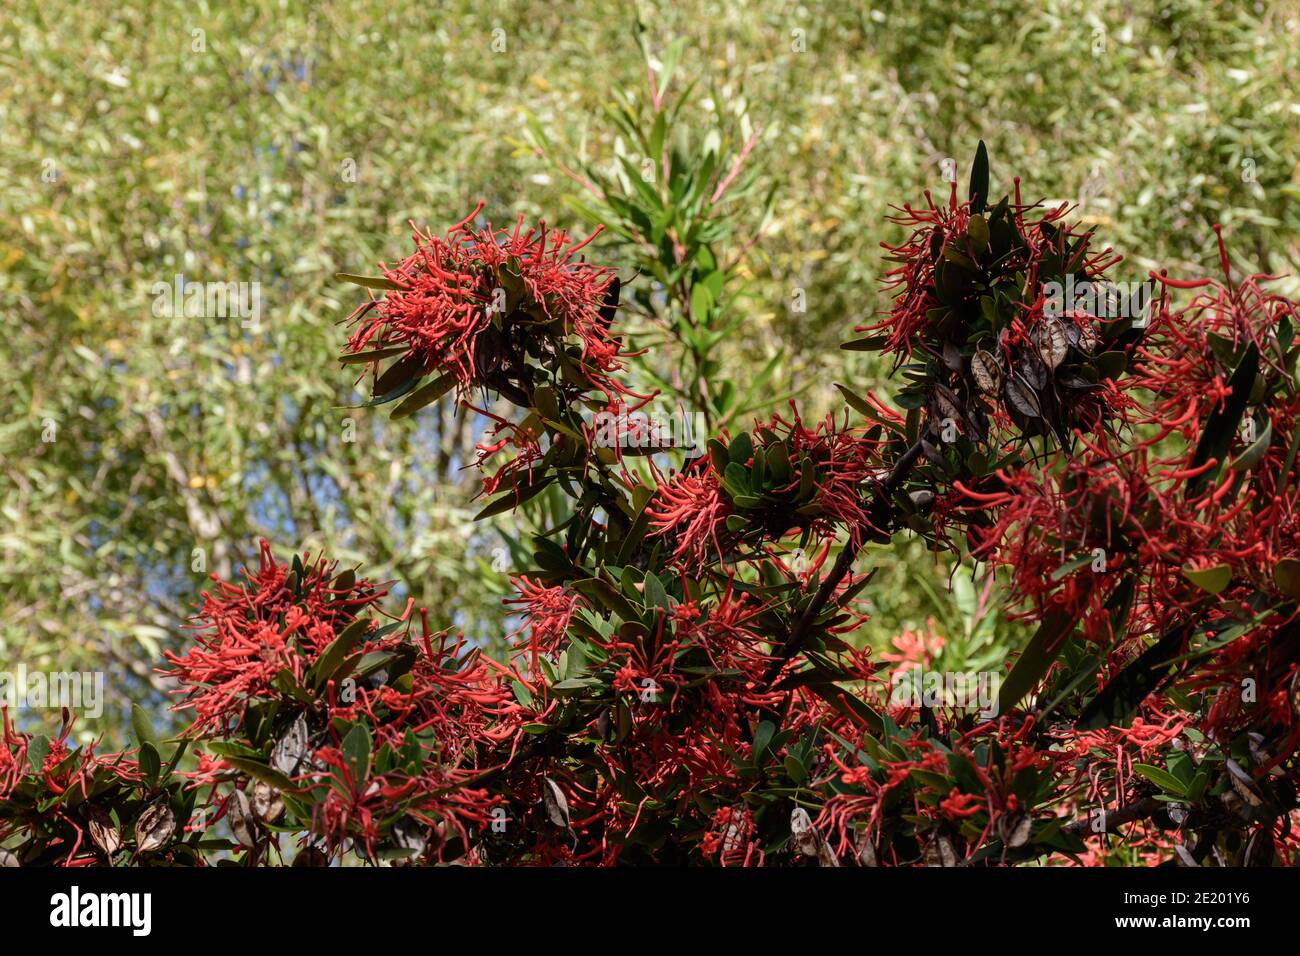 View of Embothrium coccineum bloomed during spring season in Patagonia, Argentina Stock Photo